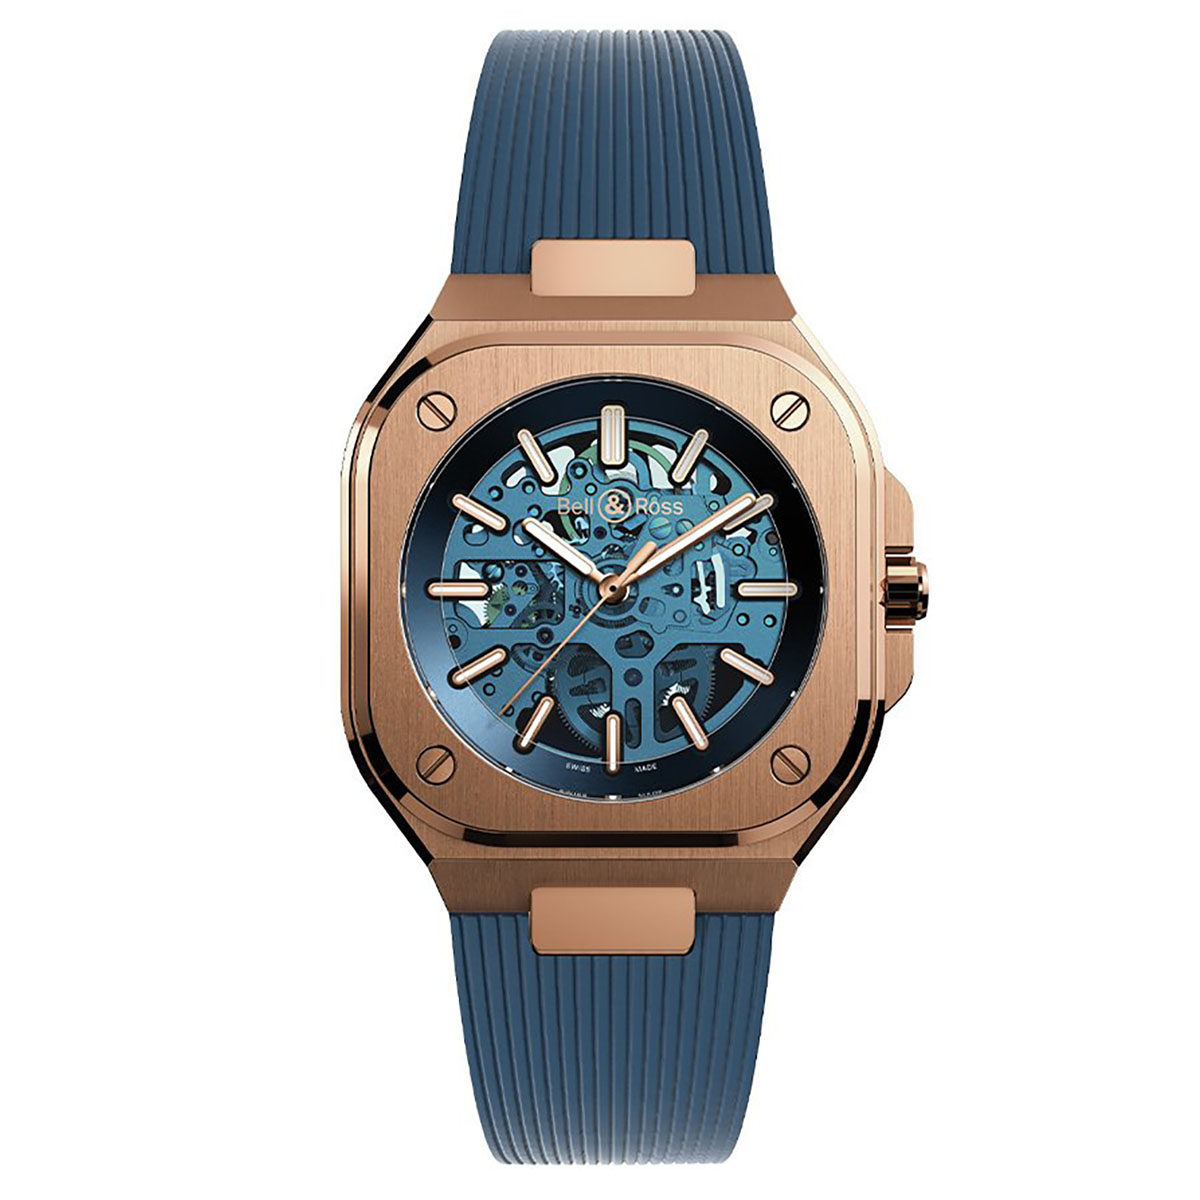 Bell & Ross BR 05 Skeleton Gold Blue BR05A-OW-PG-SK watches sale